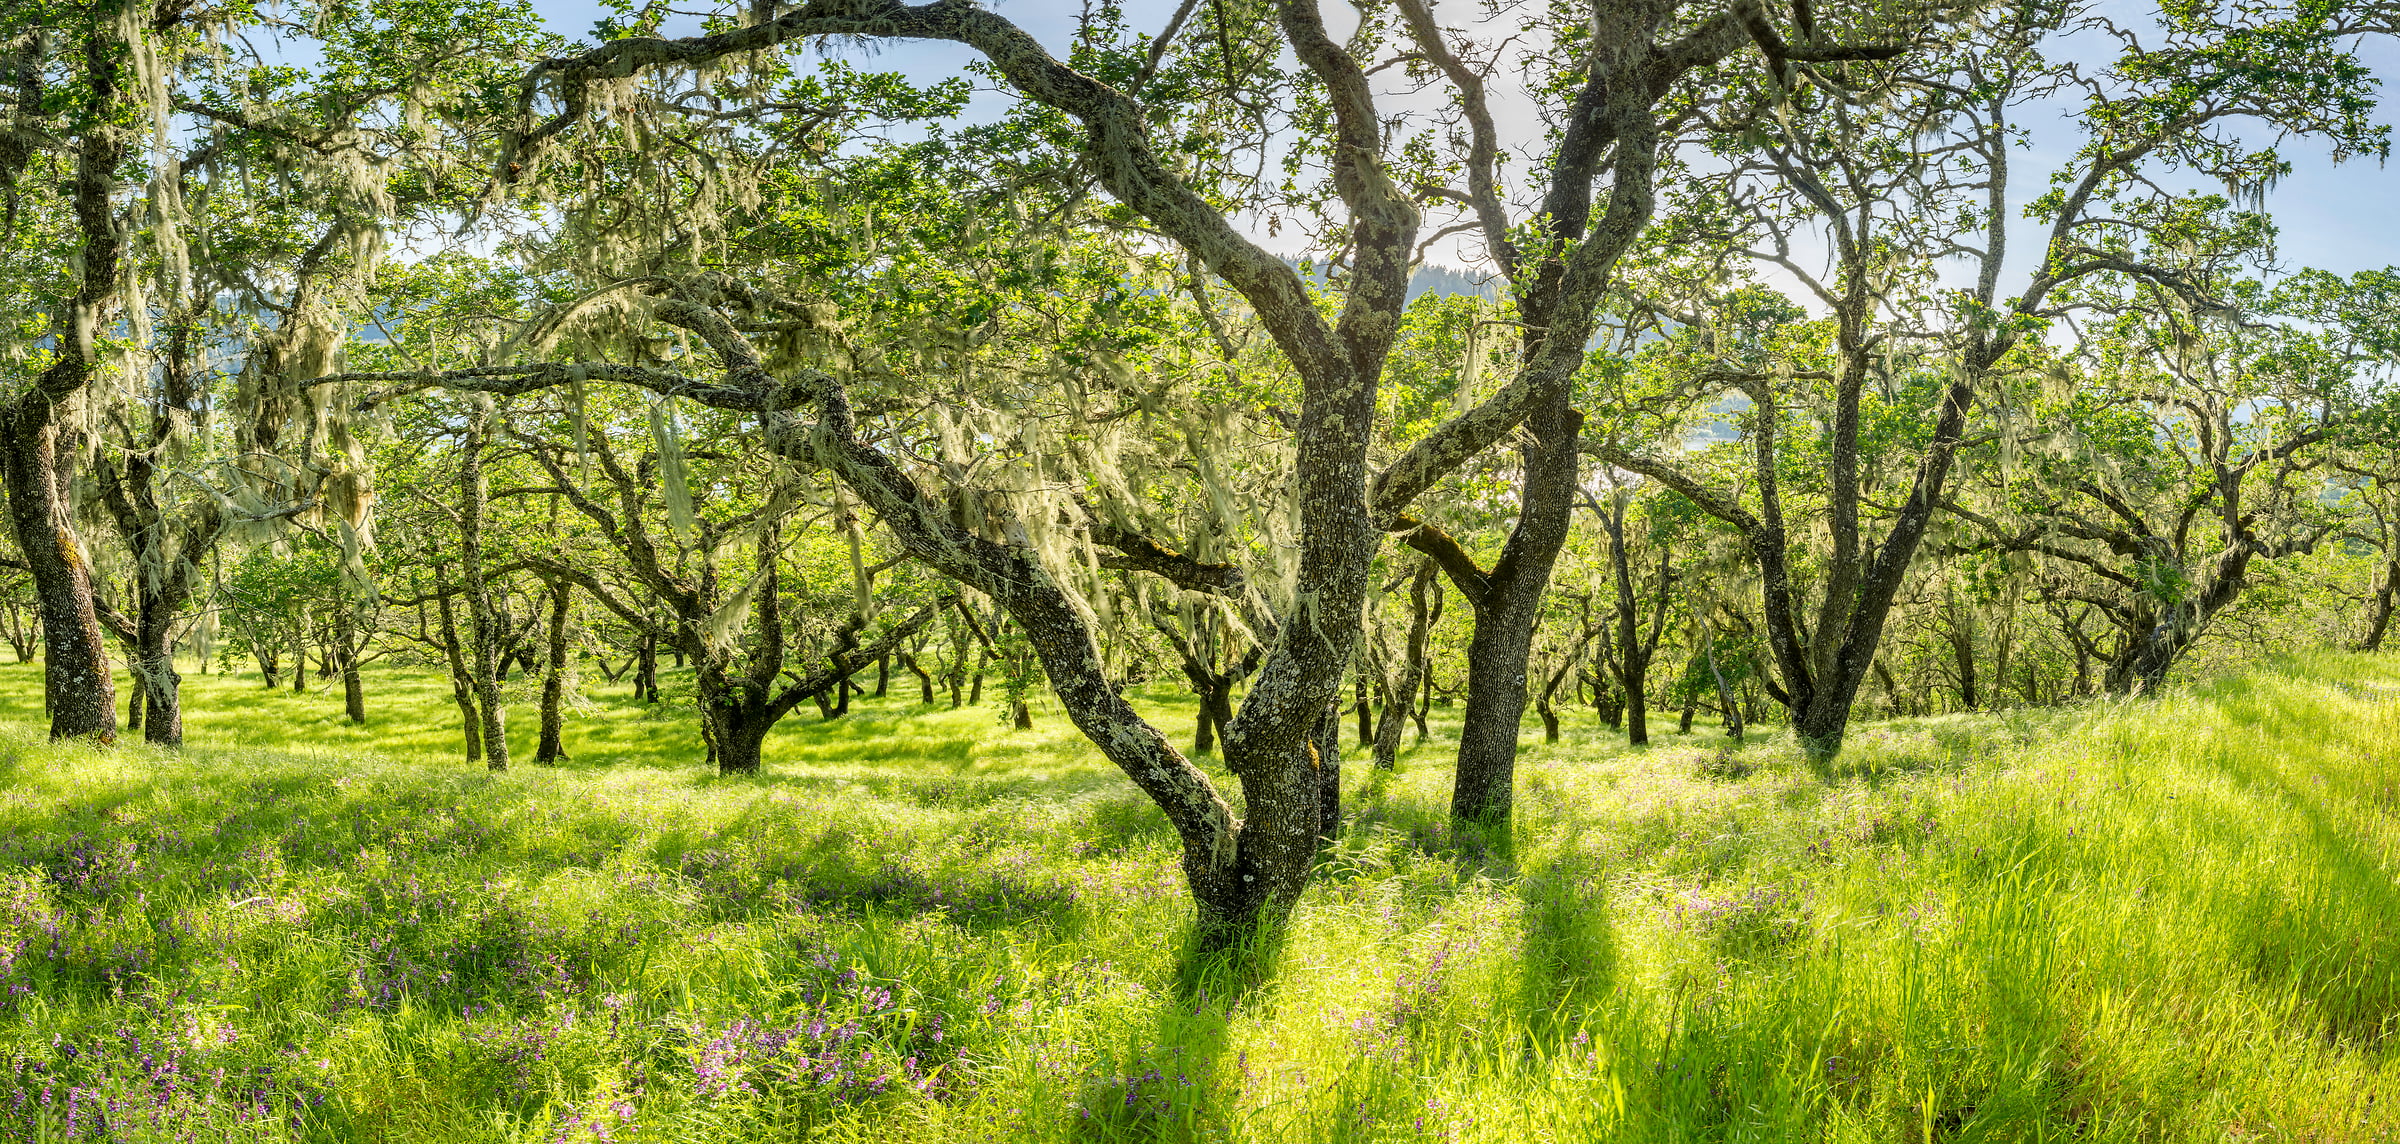 403 megapixels! A very high resolution, large-format VAST photo print of trees in Napa Valley; fine art nature photo created by Justin Katz in Lake Hennessey, Napa Valley, California.